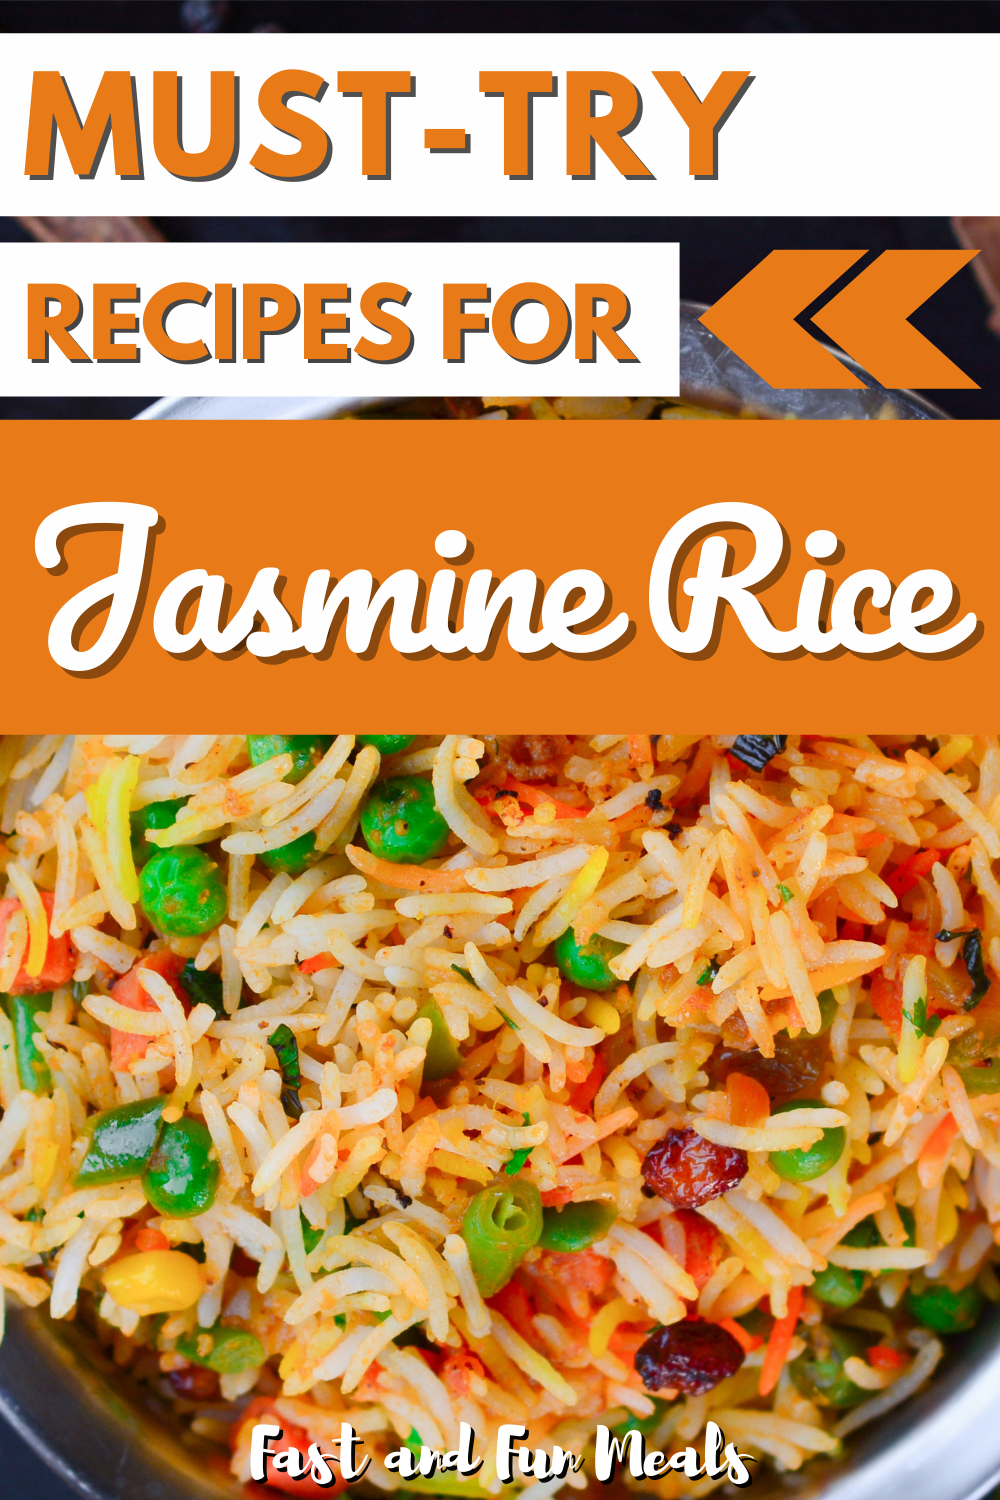 Pin showing Must-try Recipes for Jasmine Rice